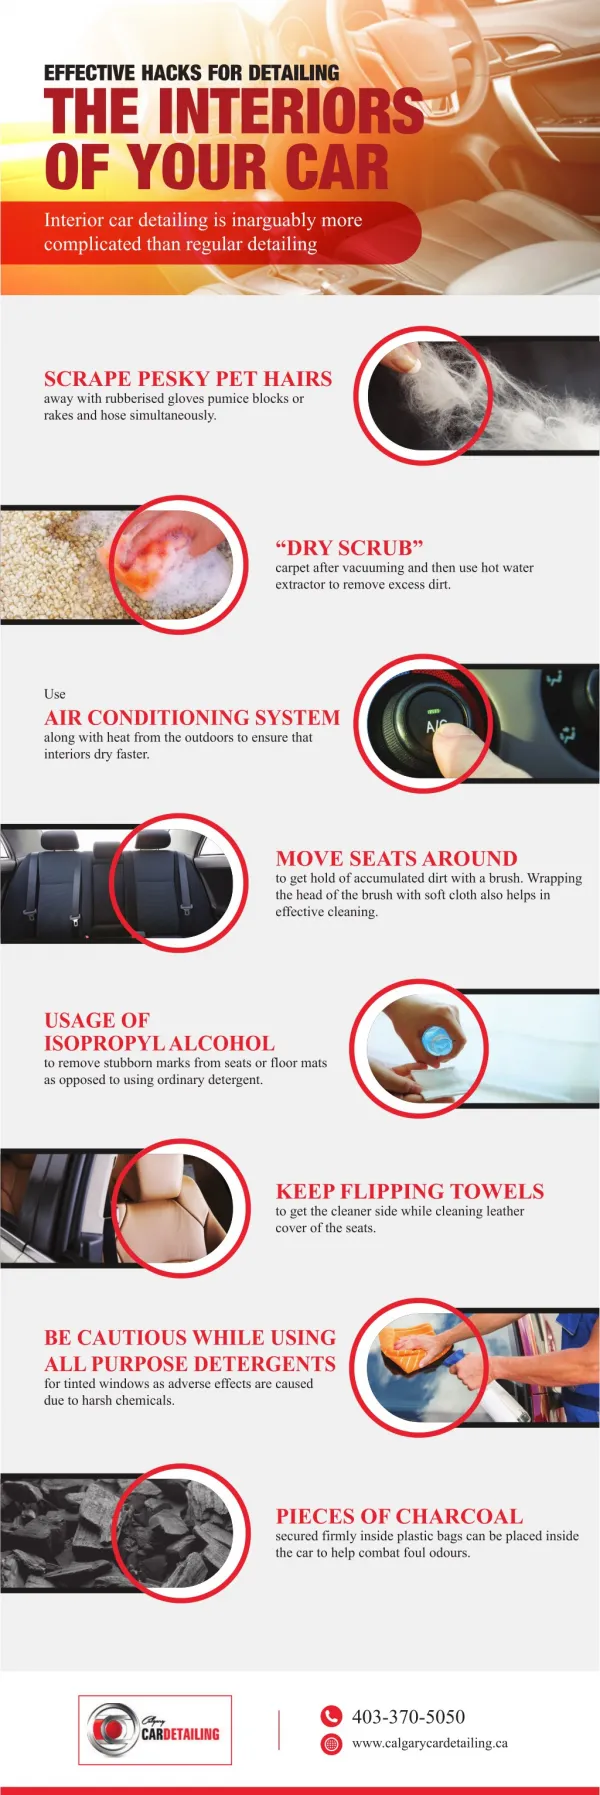 A Few Effective Hacks For Detailing The Interiors Of Your Car